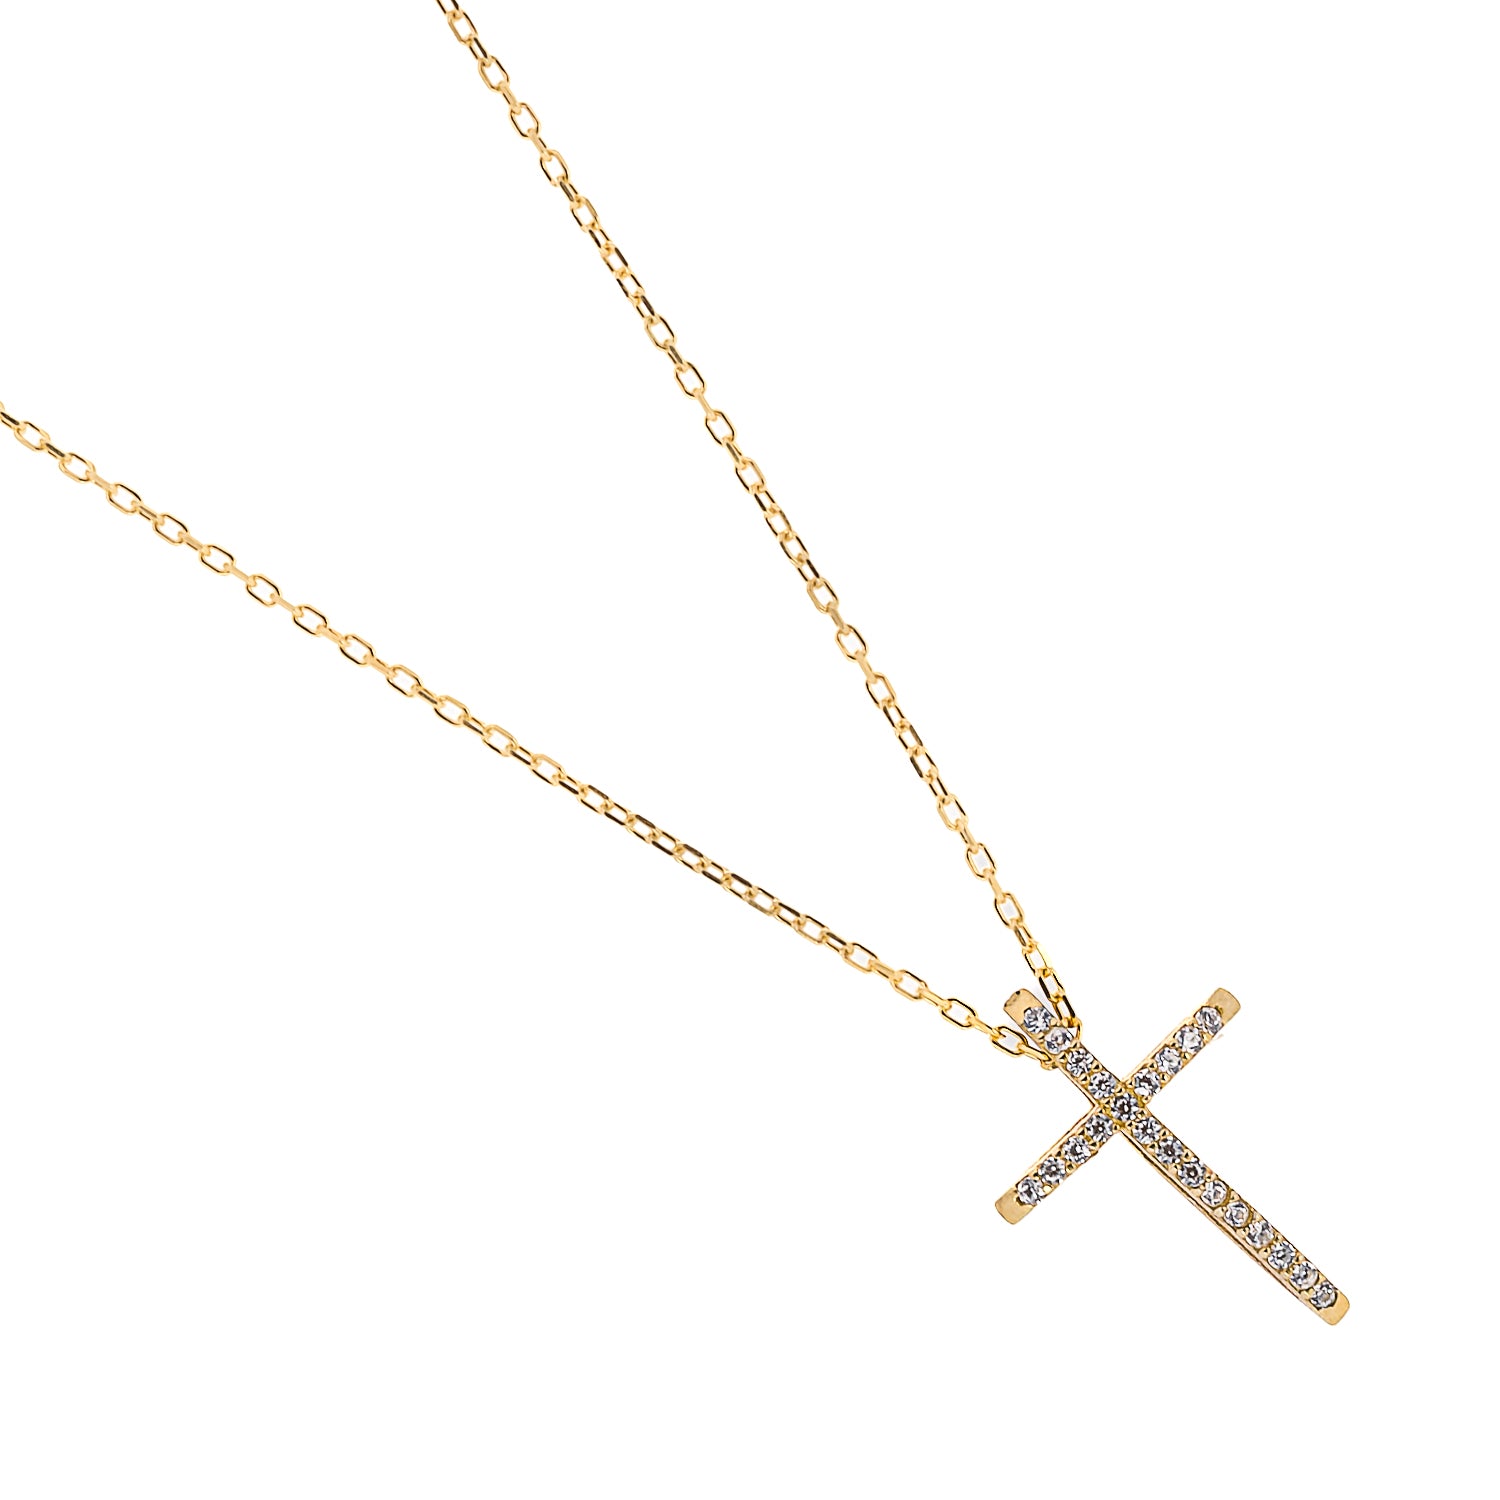 The captivating Unique Cross Diamond Necklace, a meaningful accessory that embodies elegance and faith.